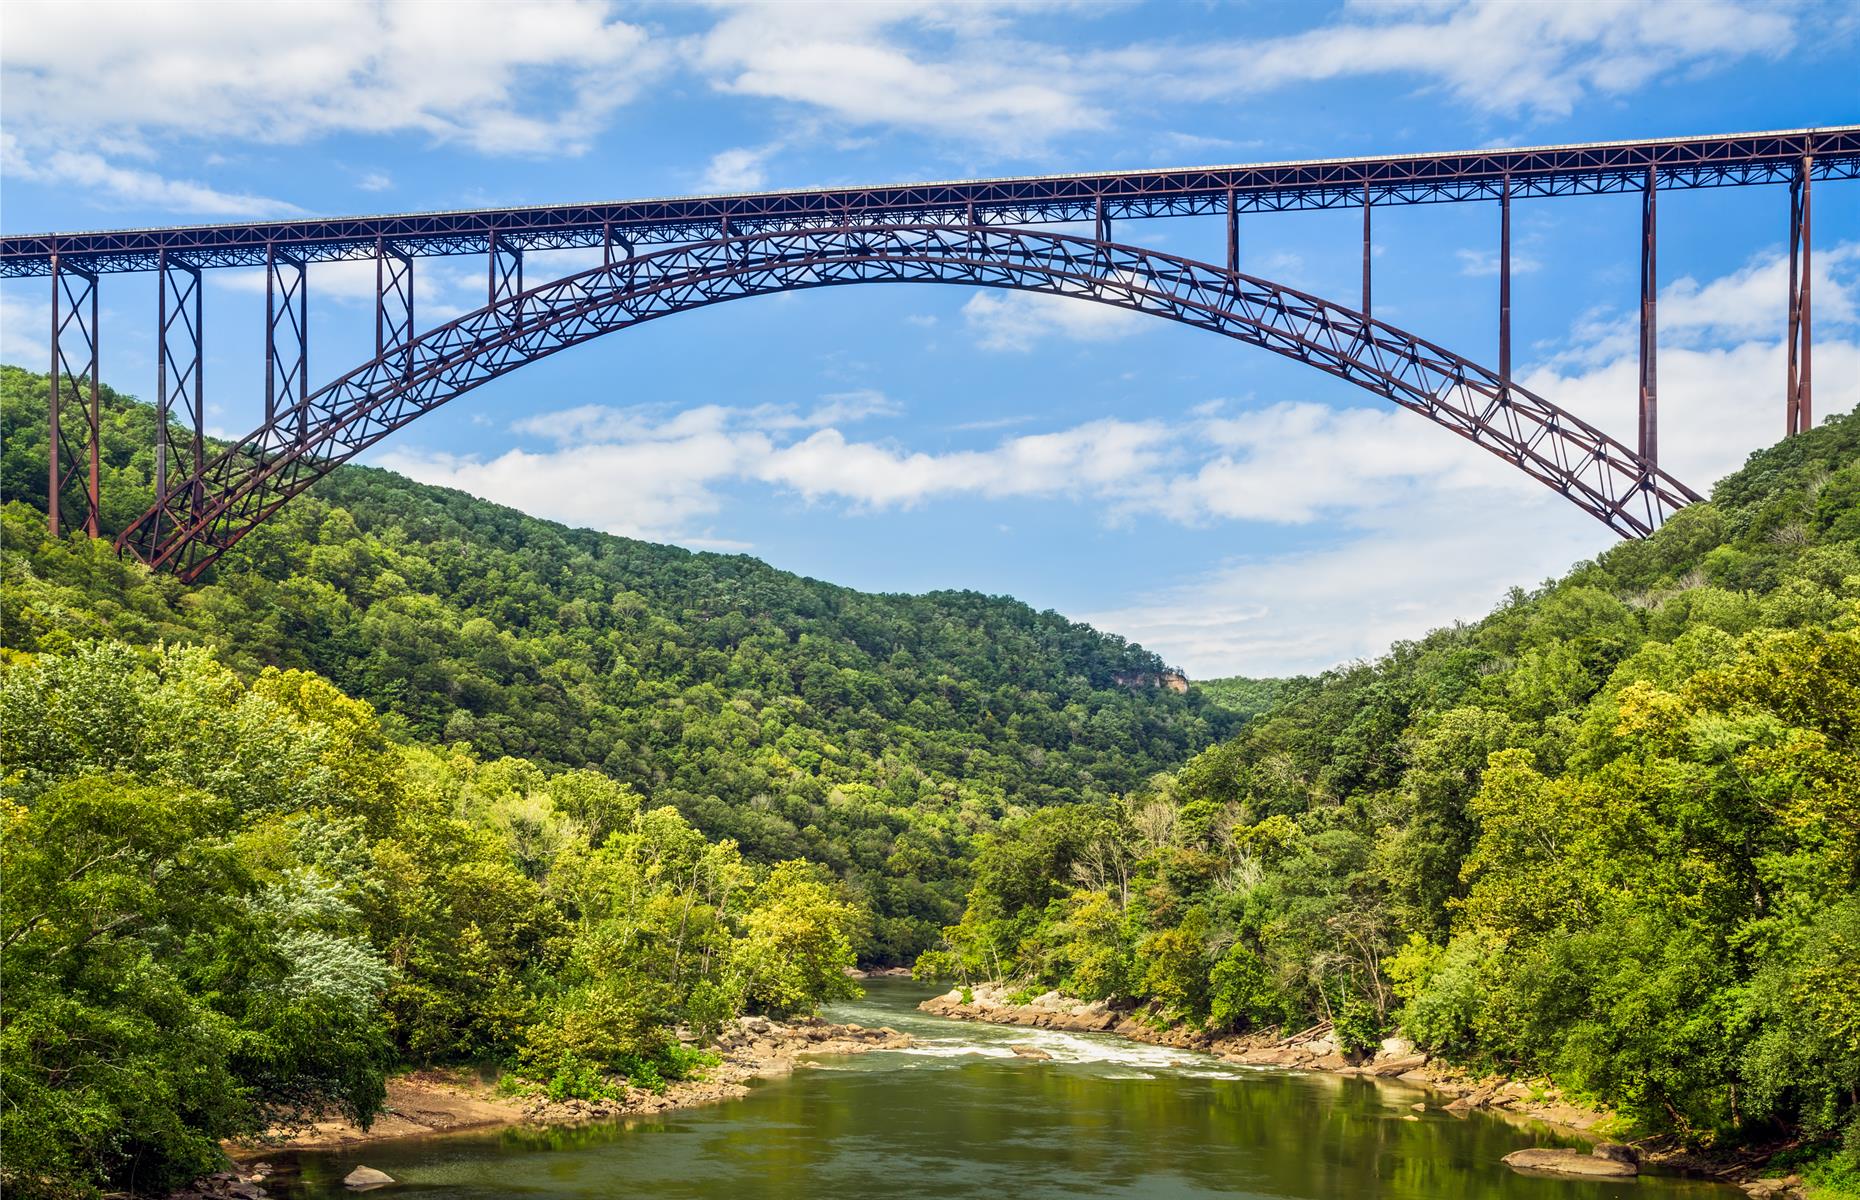 <p>America's newest national park, the <a href="https://www.nps.gov/neri/index.htm">New River Gorge</a> takes in some 70,000 acres of land around the waterway, including dense areas of primeval forest. A haven for thrill-seekers, there are white-water rapids and plenty of spots for advanced rock climbers too. If you're after something a little less strenuous, the Canyon Rim Boardwalk trail grants stunning views of the New River Gorge Bridge (pictured).</p>